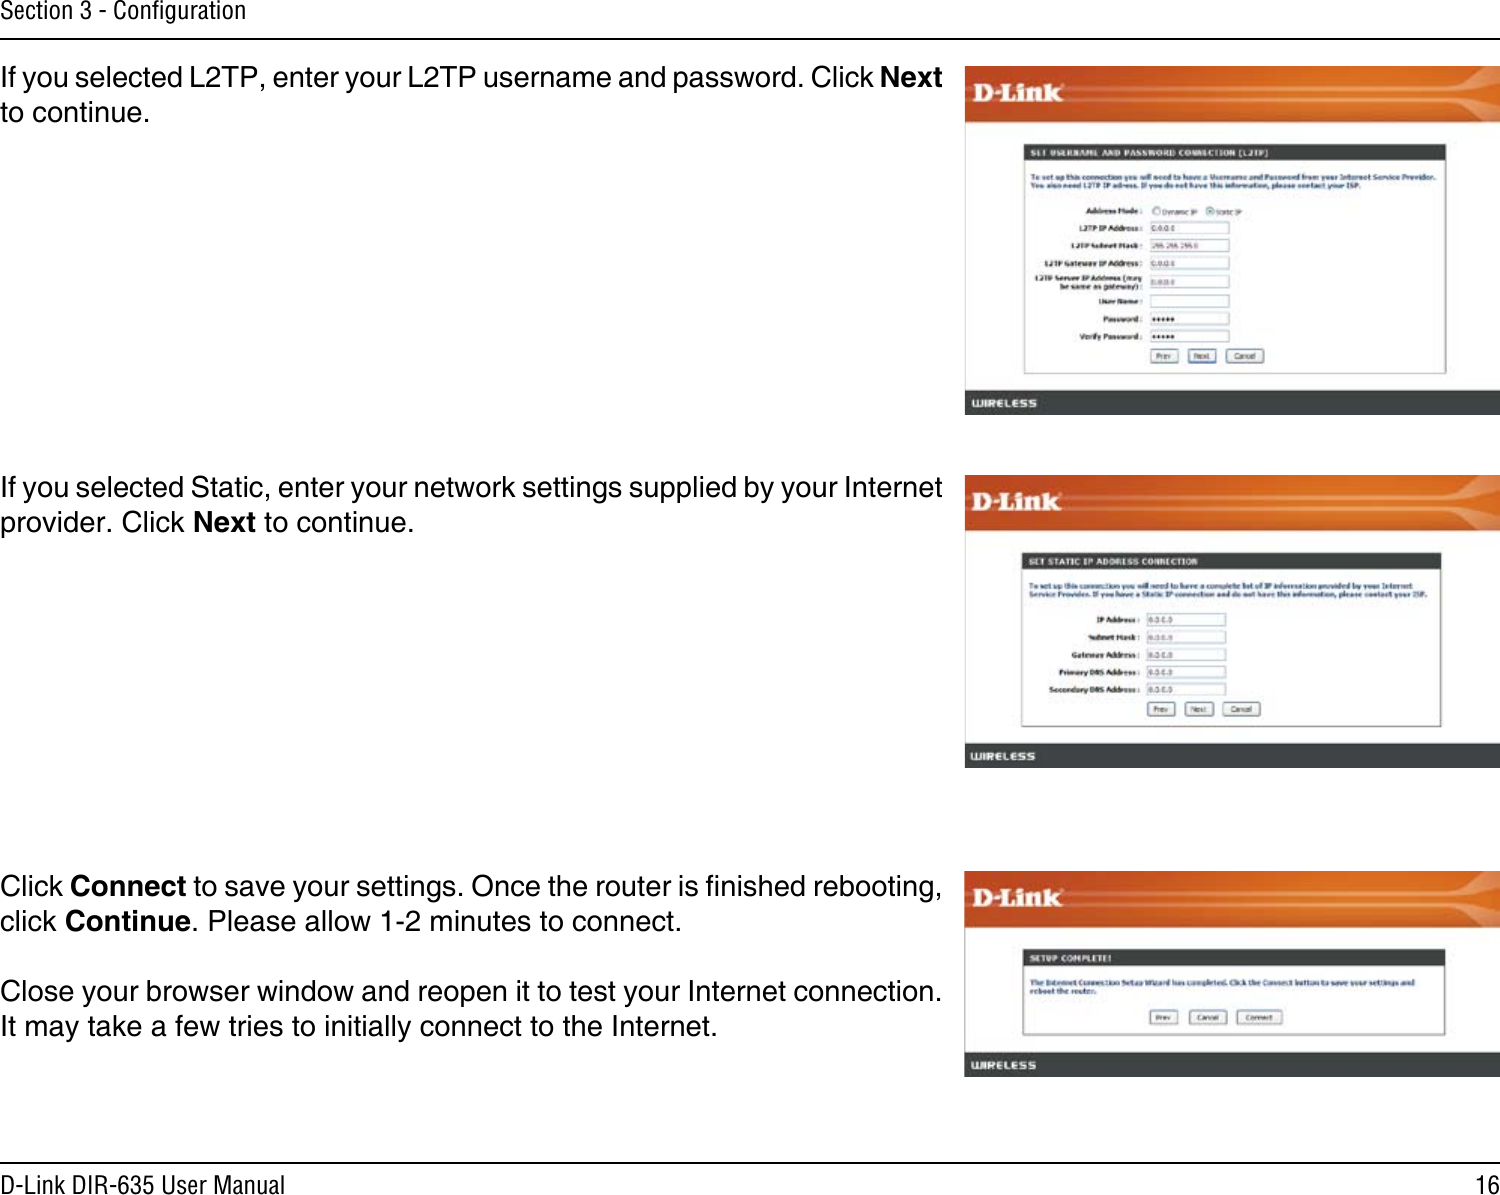 16D-Link DIR-635 User ManualSection 3 - ConﬁgurationIf you selected L2TP, enter your L2TP username and password. Click Next to continue.If you selected Static, enter your network settings supplied by your Internet provider. Click Next to continue.Click Connect to save your settings. Once the router is nished rebooting, click Continue. Please allow 1-2 minutes to connect. Close your browser window and reopen it to test your Internet connection. It may take a few tries to initially connect to the Internet.